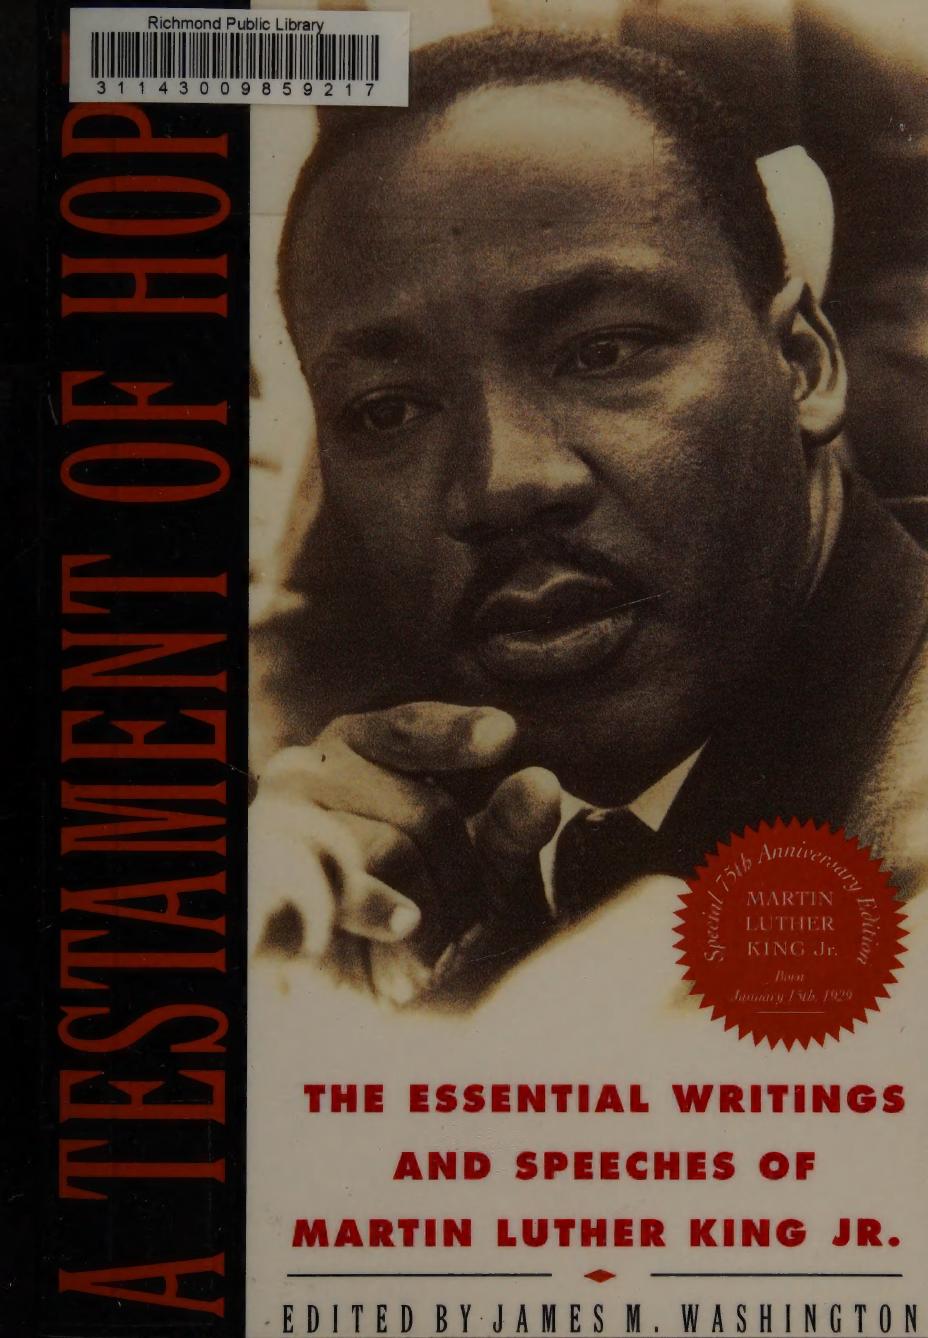 A Testament of Hope: The Essential Writings and Speeches by Martin Luther King